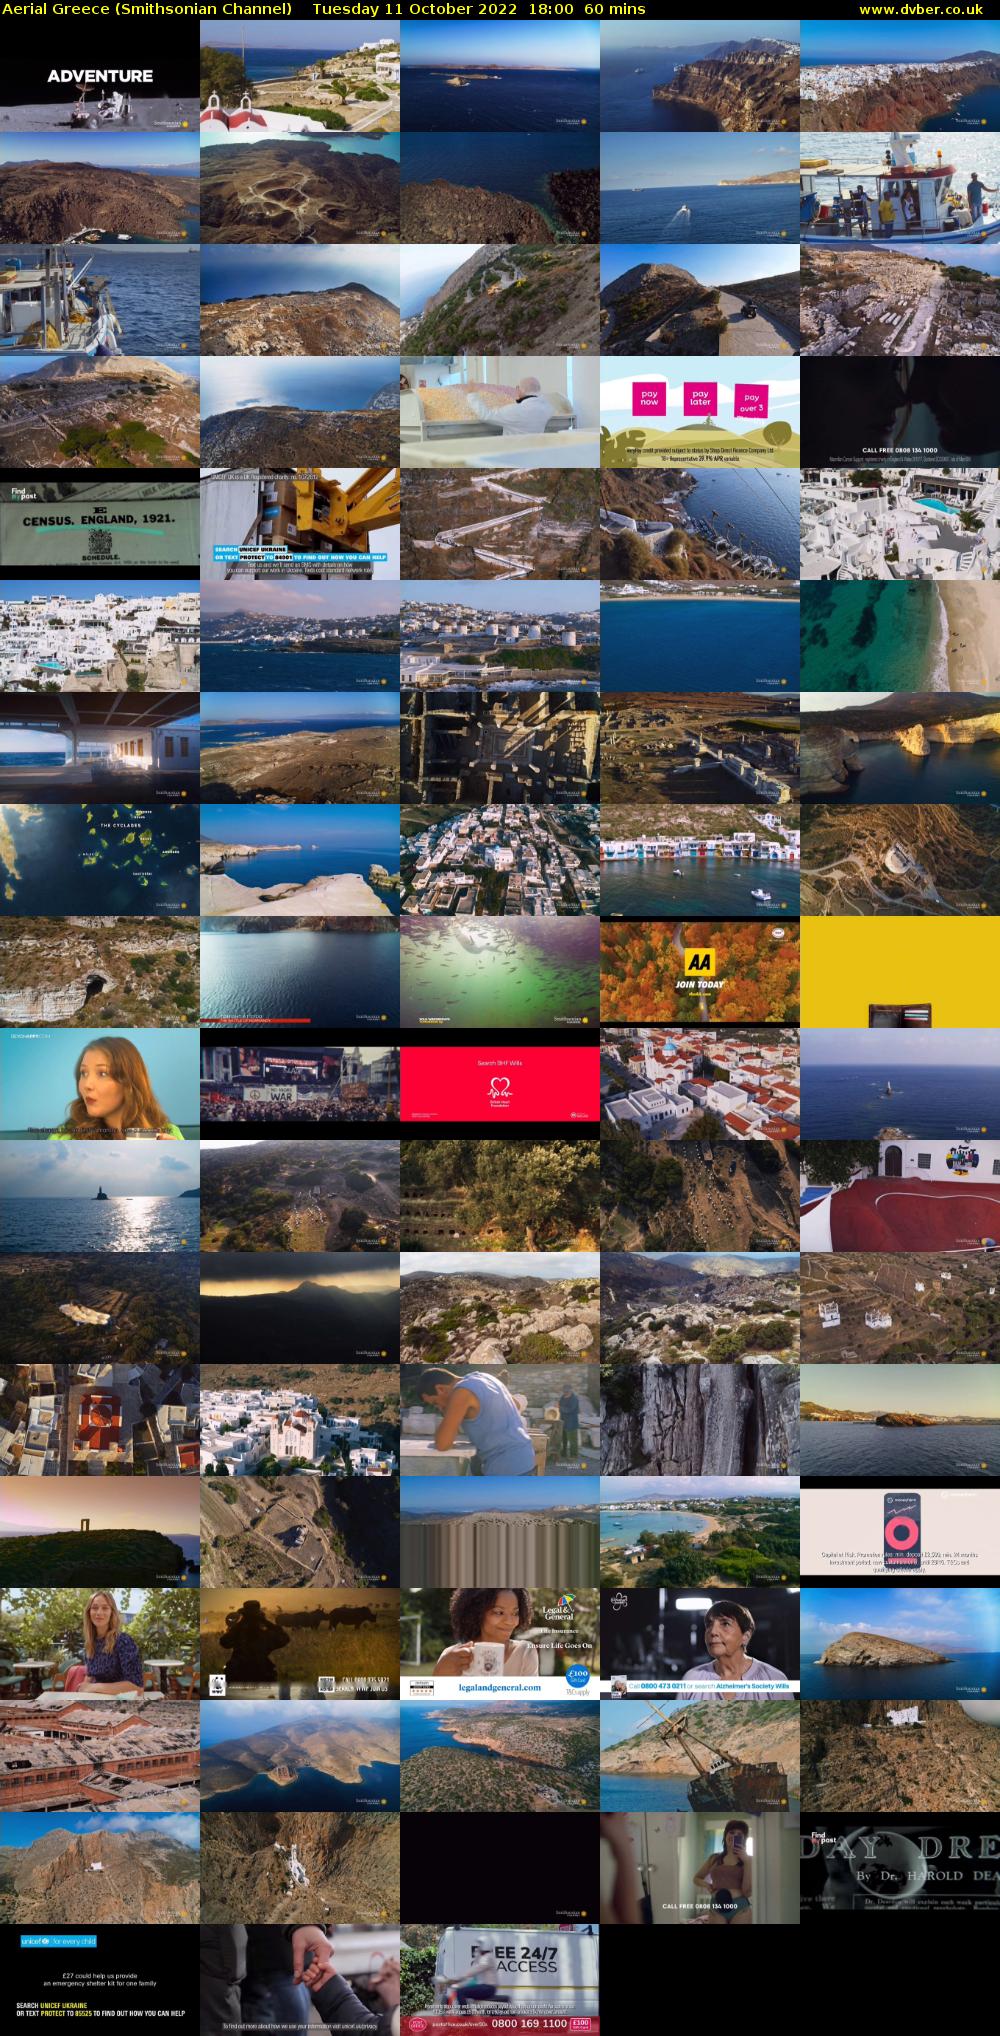 Aerial Greece (Smithsonian Channel) Tuesday 11 October 2022 18:00 - 19:00